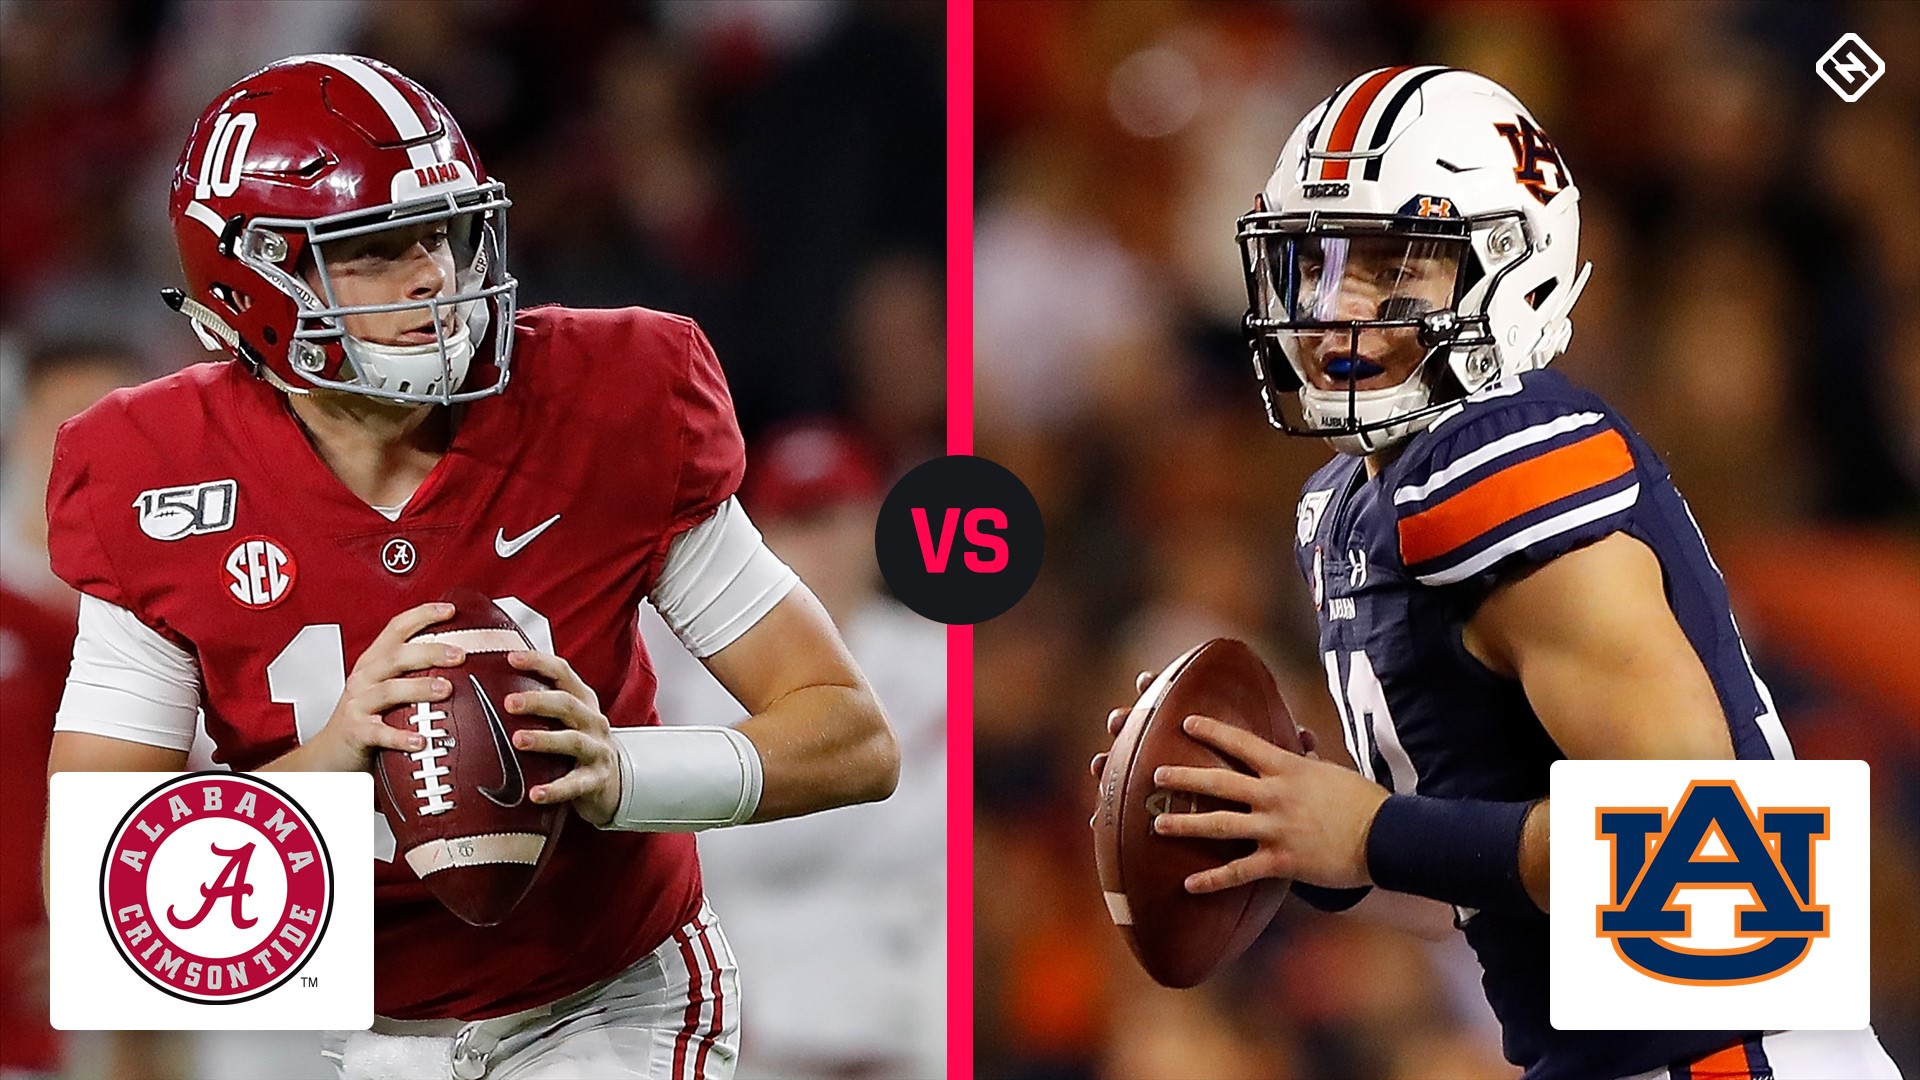 Live score update: Who is winning the Alabama game